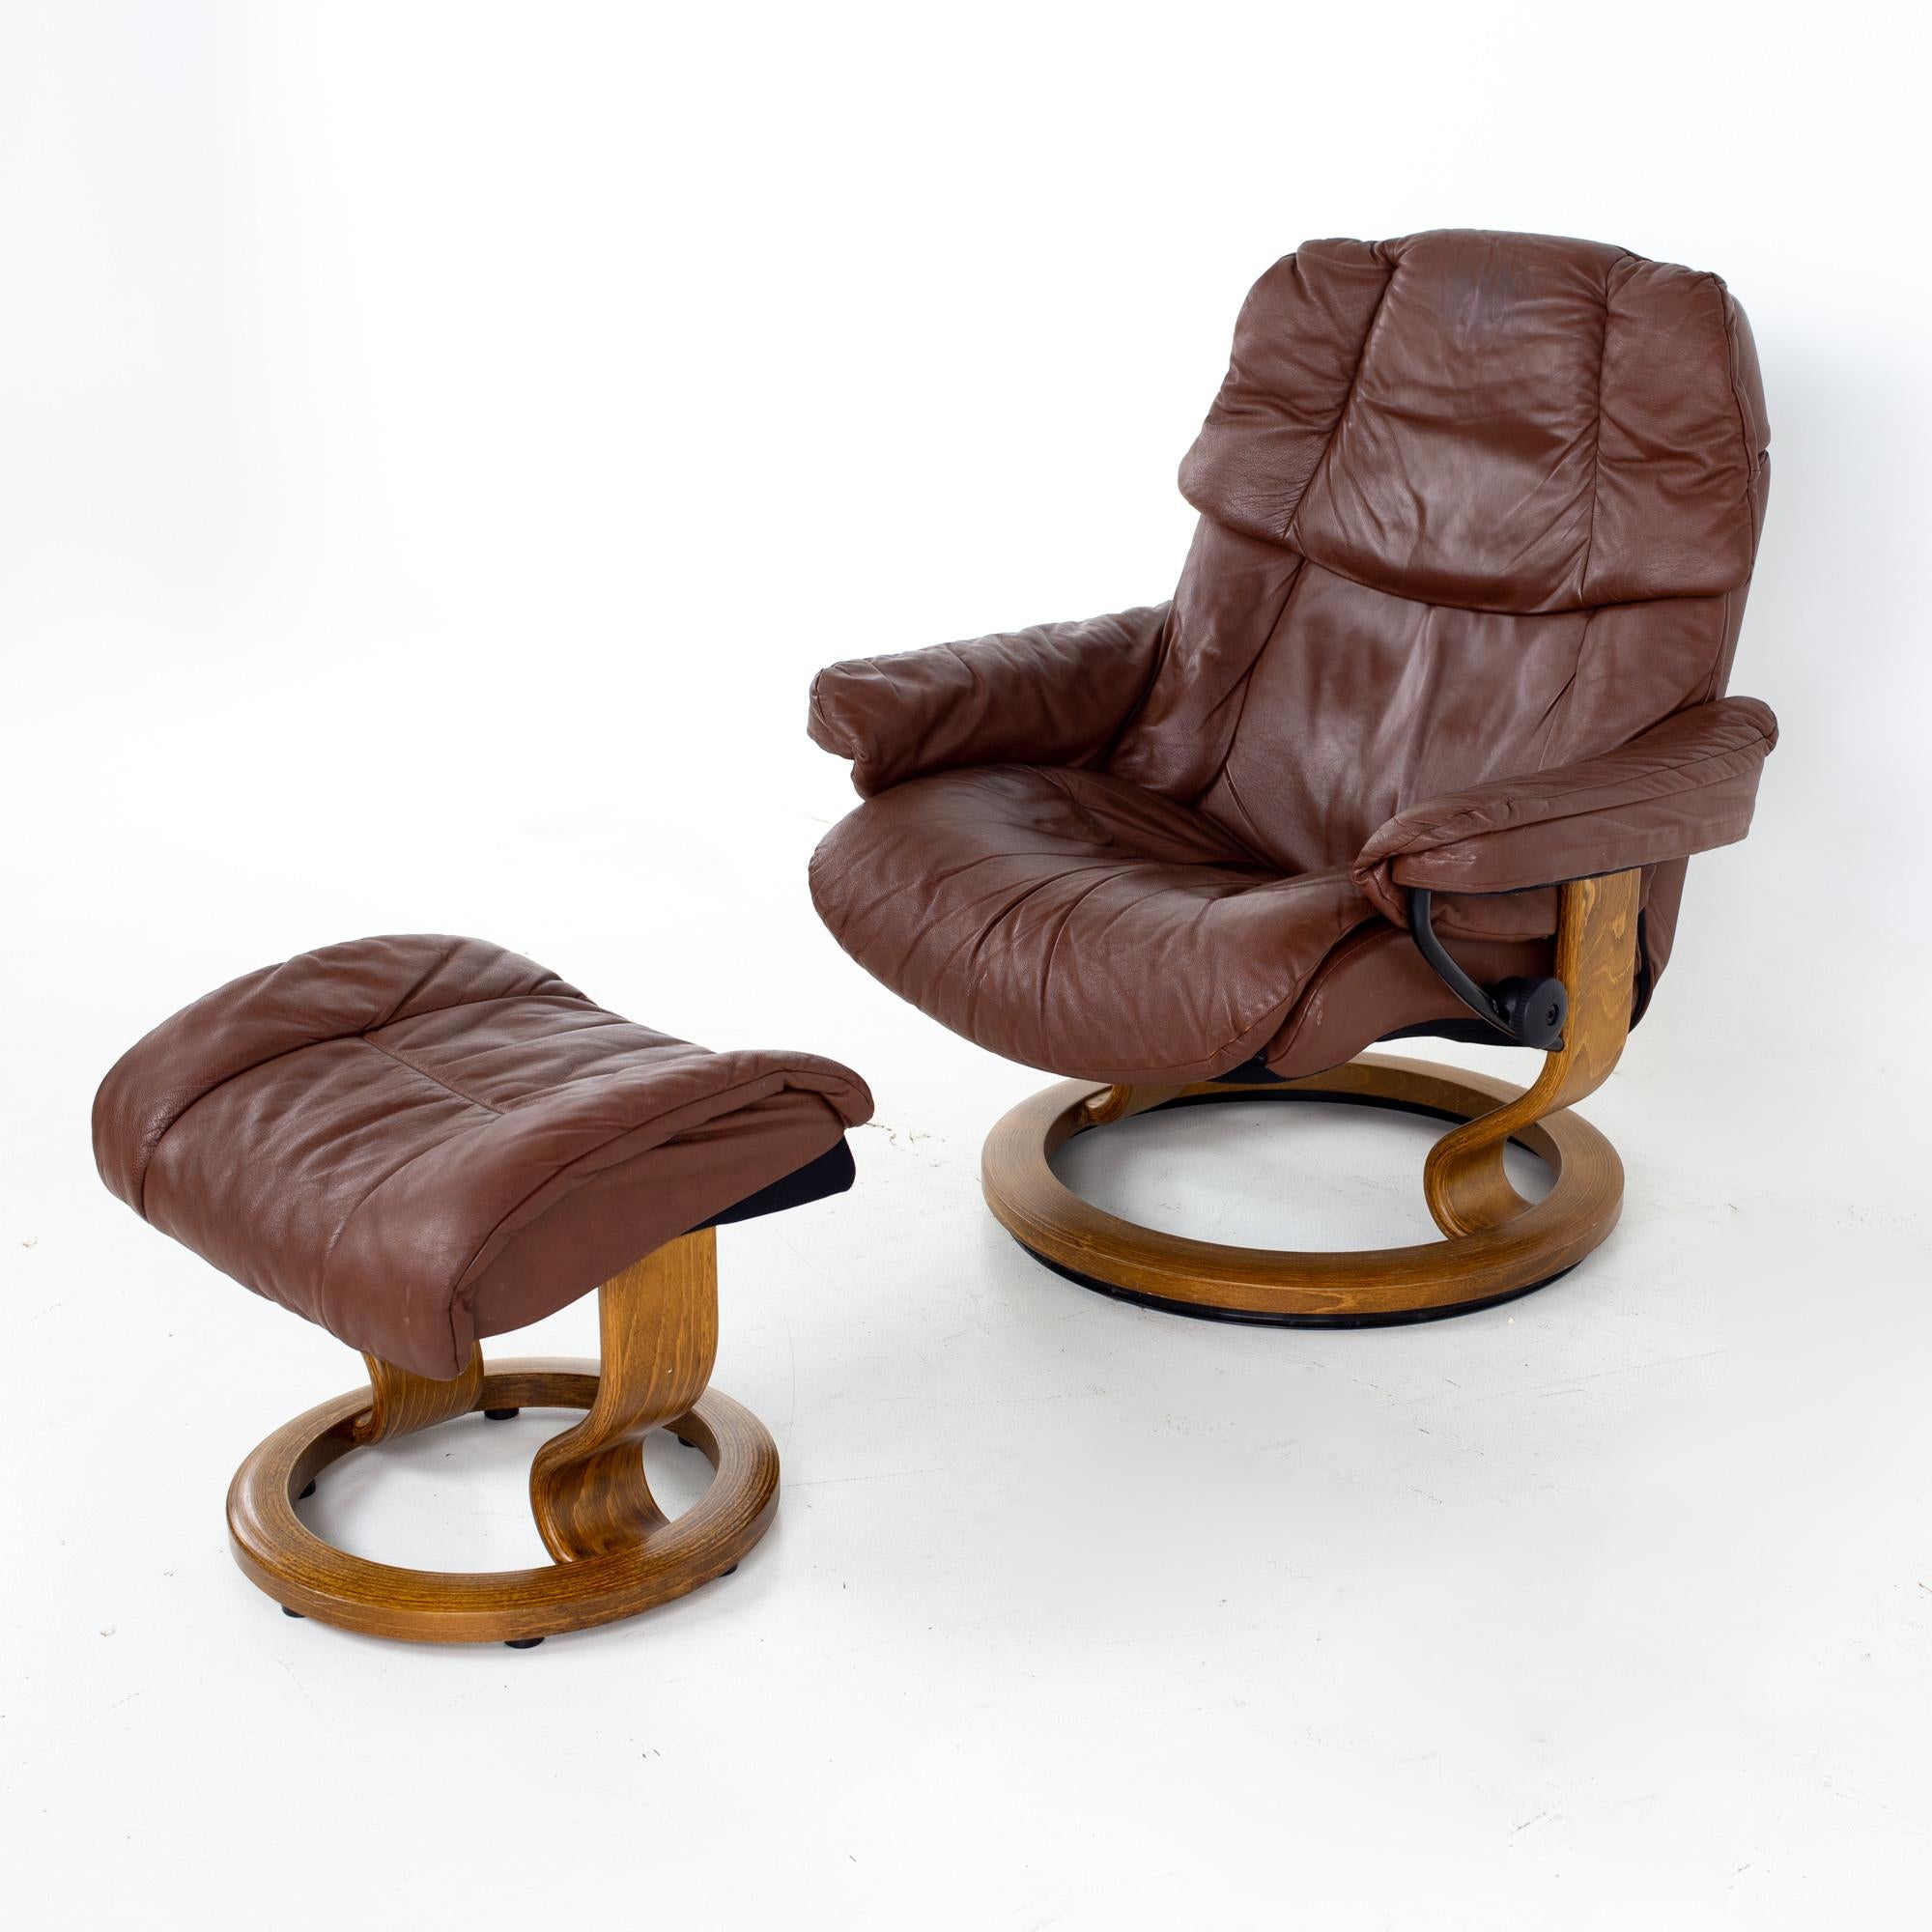 Ekornes stressless Paloma mid century reclining swivel leather lounge chair and ottoman
Chair measures: 34 wide x 30 deep x 38 high, with a seat height of 17 inches and arm height of 21 inches
Ottoman measures: 19 wide x 16 deep x 16.5 inches high